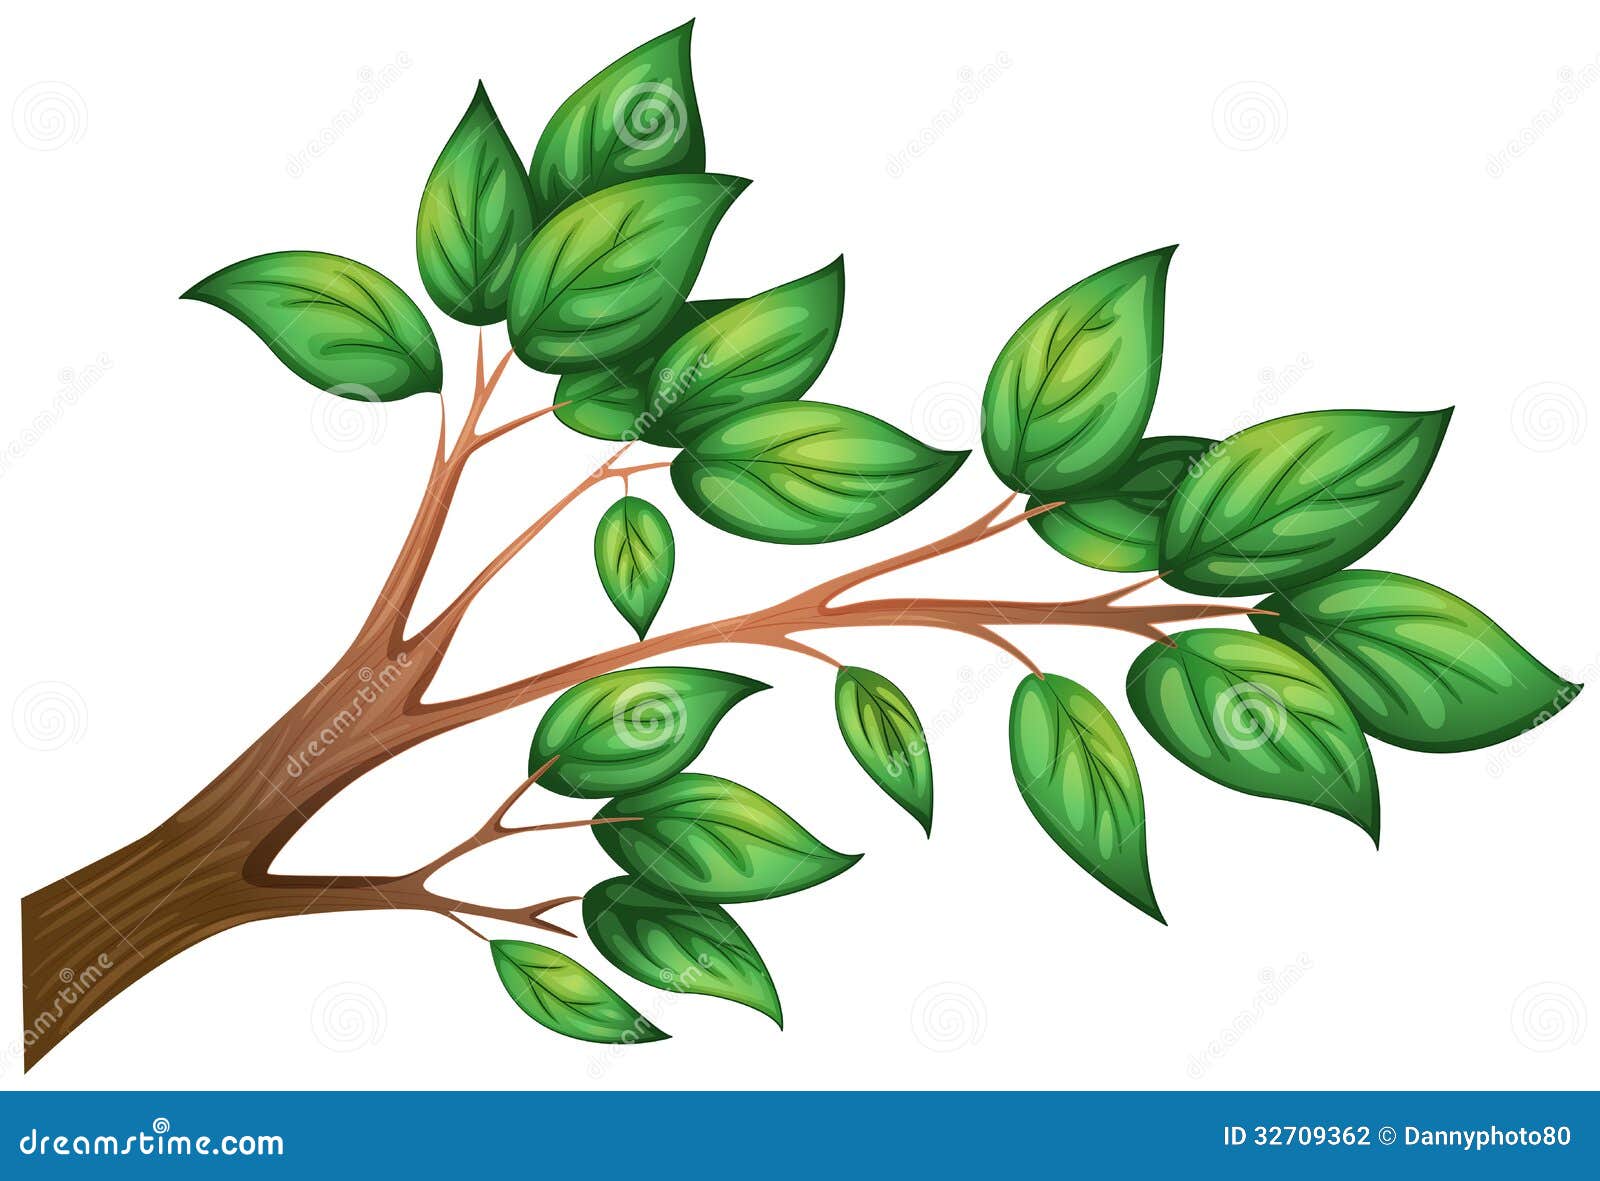 Illustration of a branch of a tree with leaves on a white background.